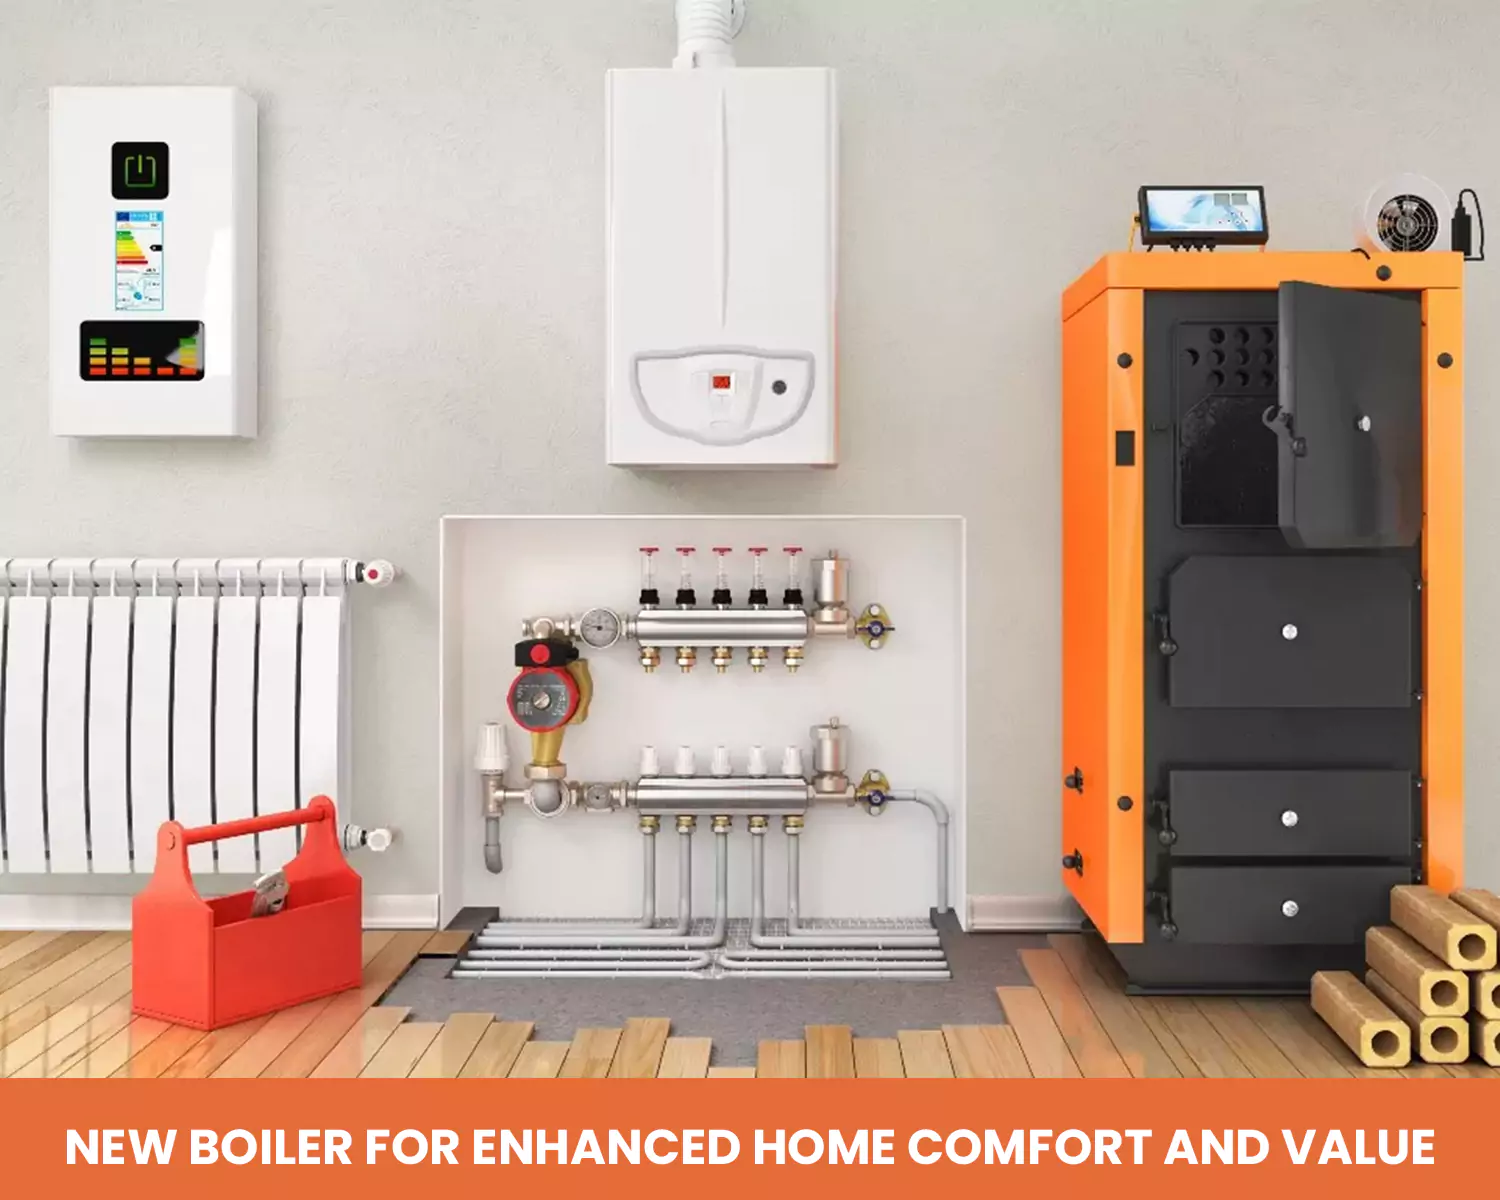 New Boiler for Enhanced Home Comfort and Value